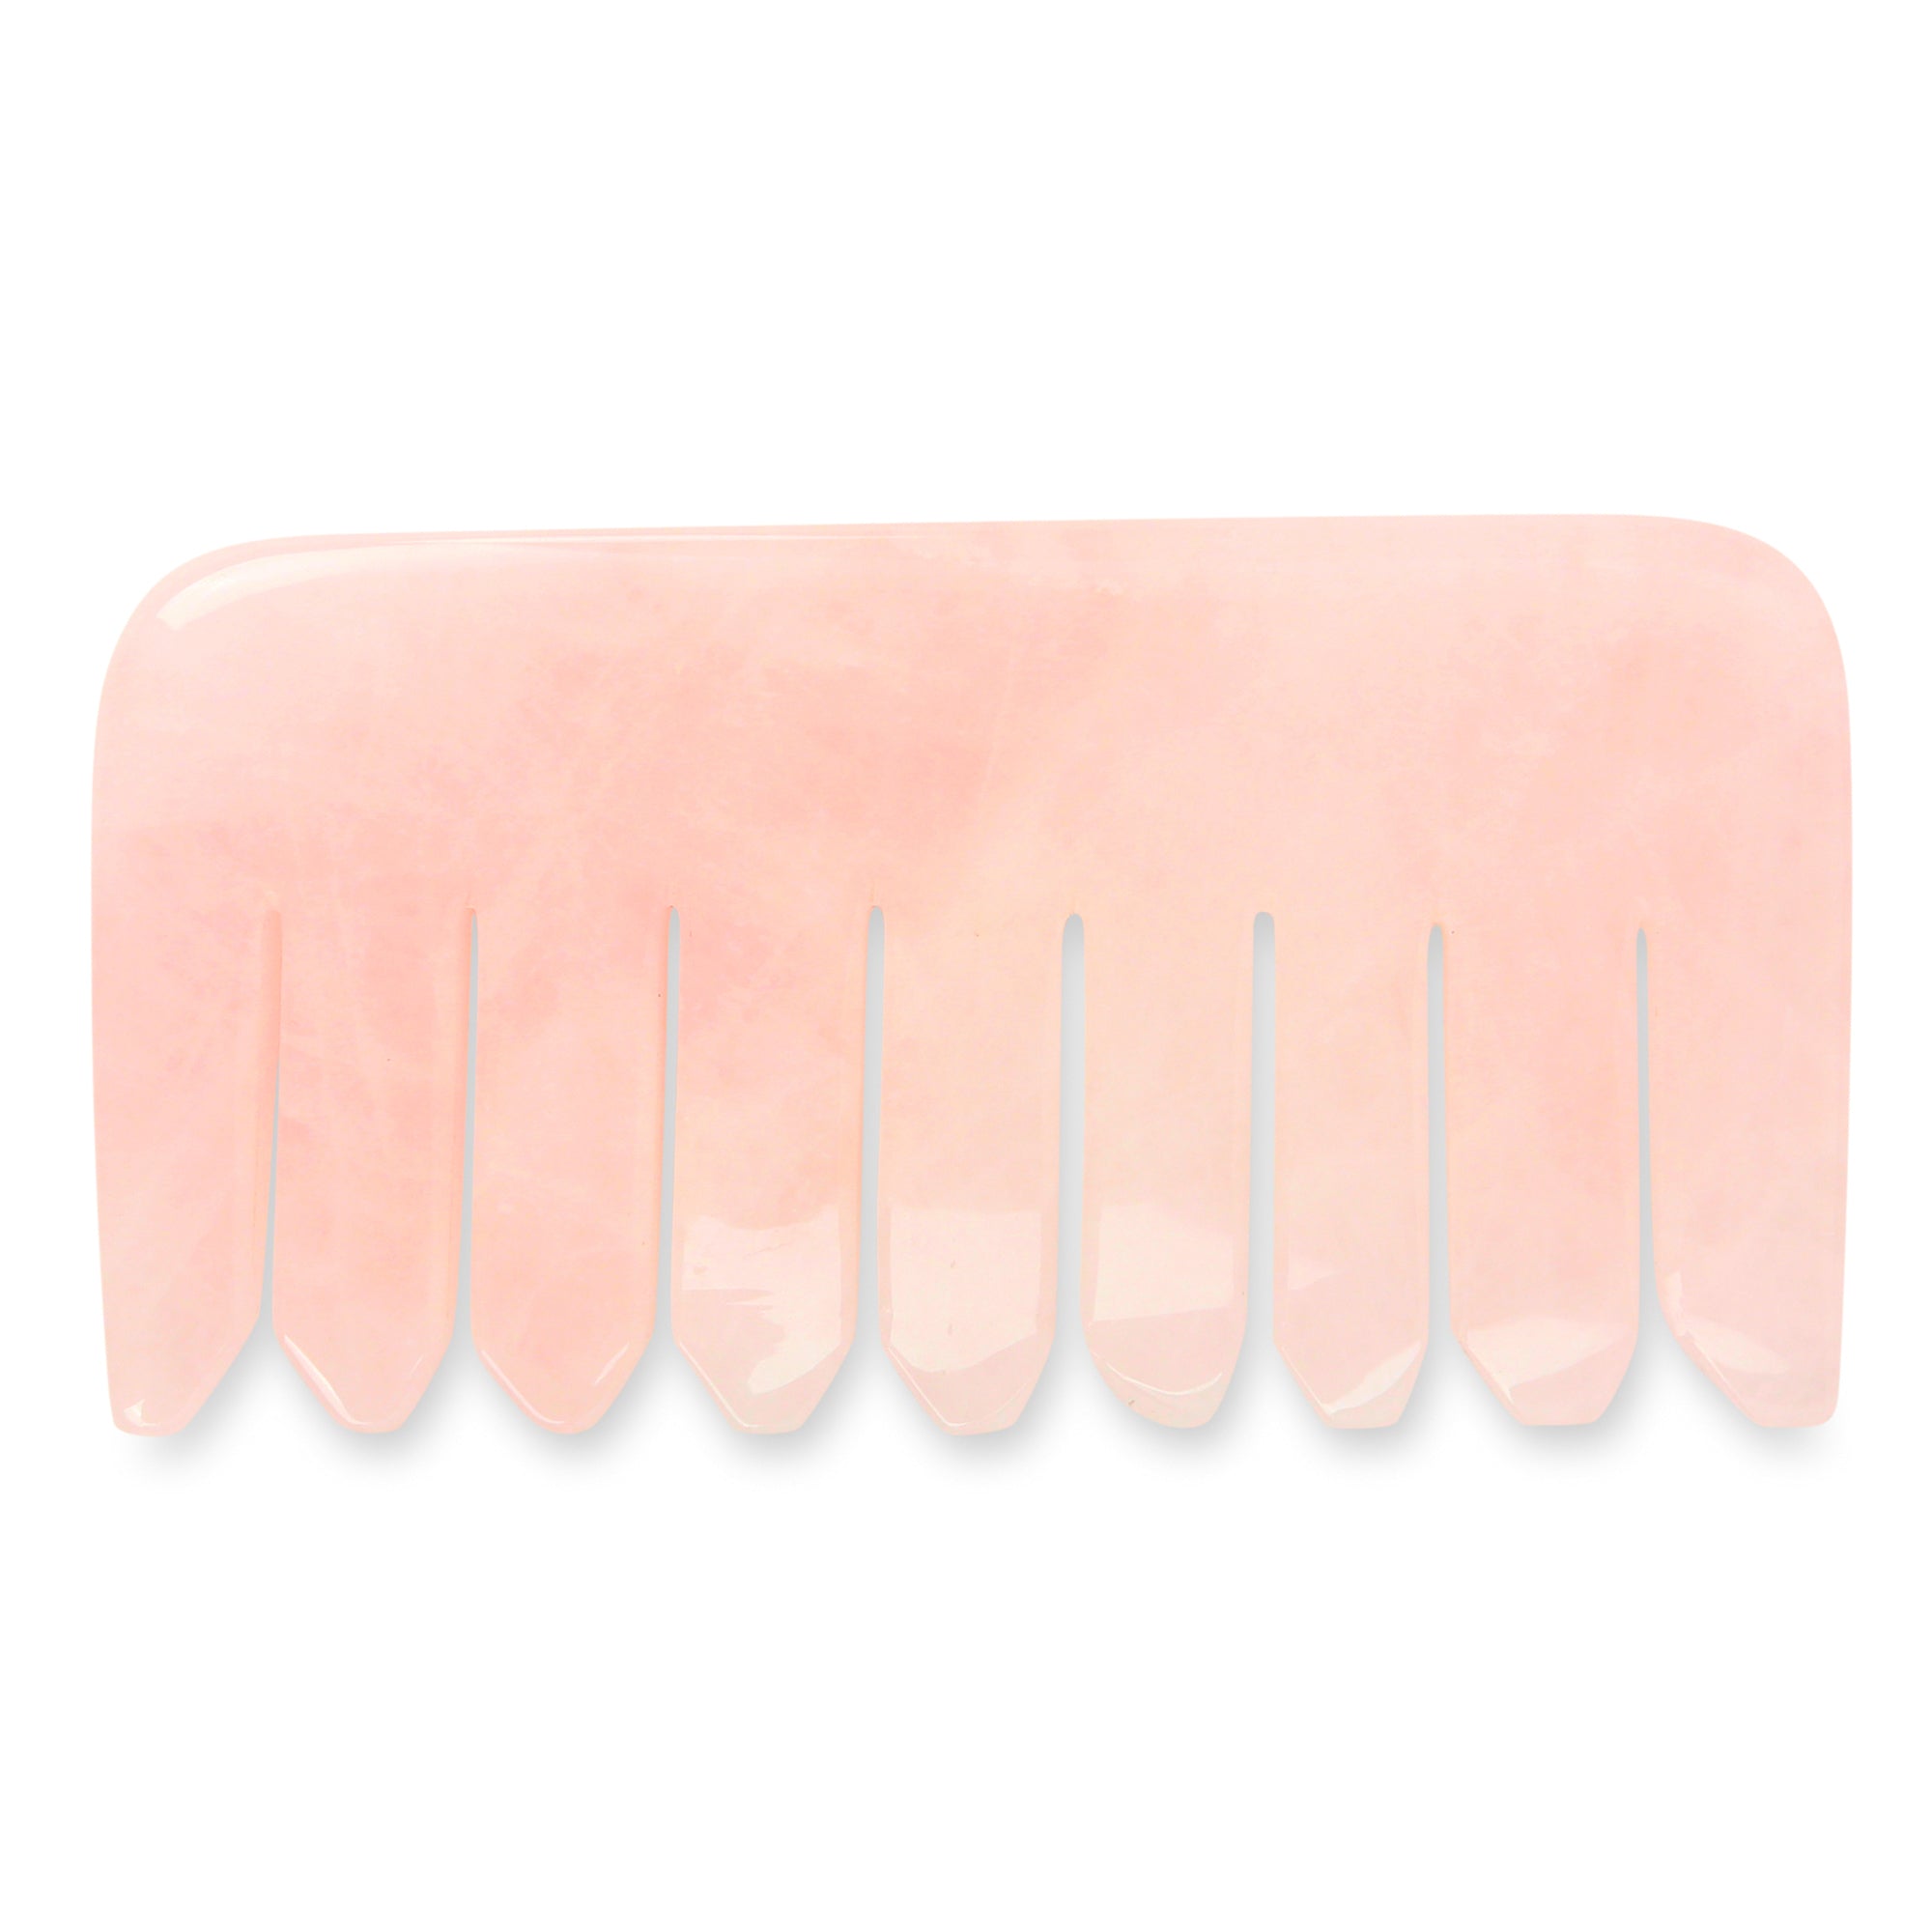 Rose Quartz Comb - Natural Chemical Free Crystal for Silky Luxurious Hair